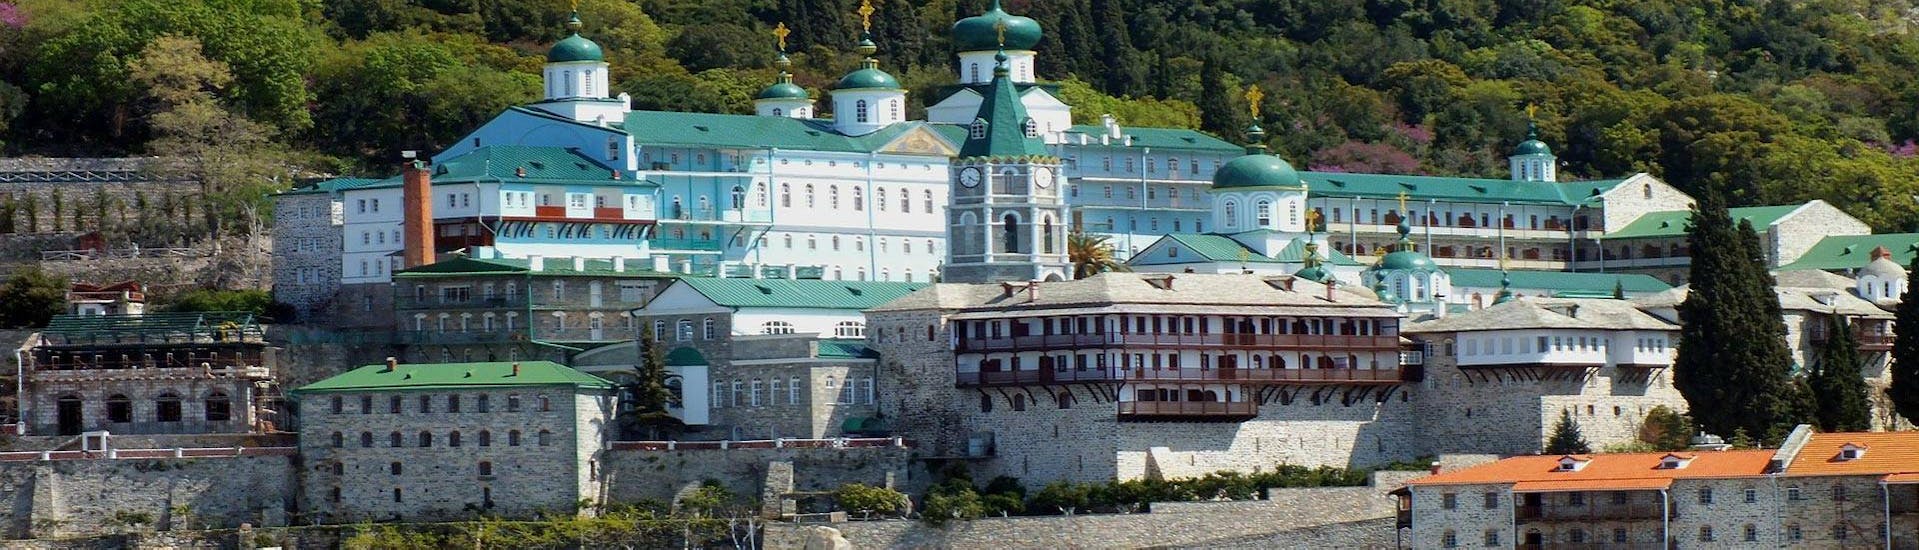 One of the monasteries of the Mount Athos, which can be seen from the boat during the Private Boat Trip to Mount Athos and Ammouliani Island with Swimming with Luxury Sport Cruise Halkidiki.